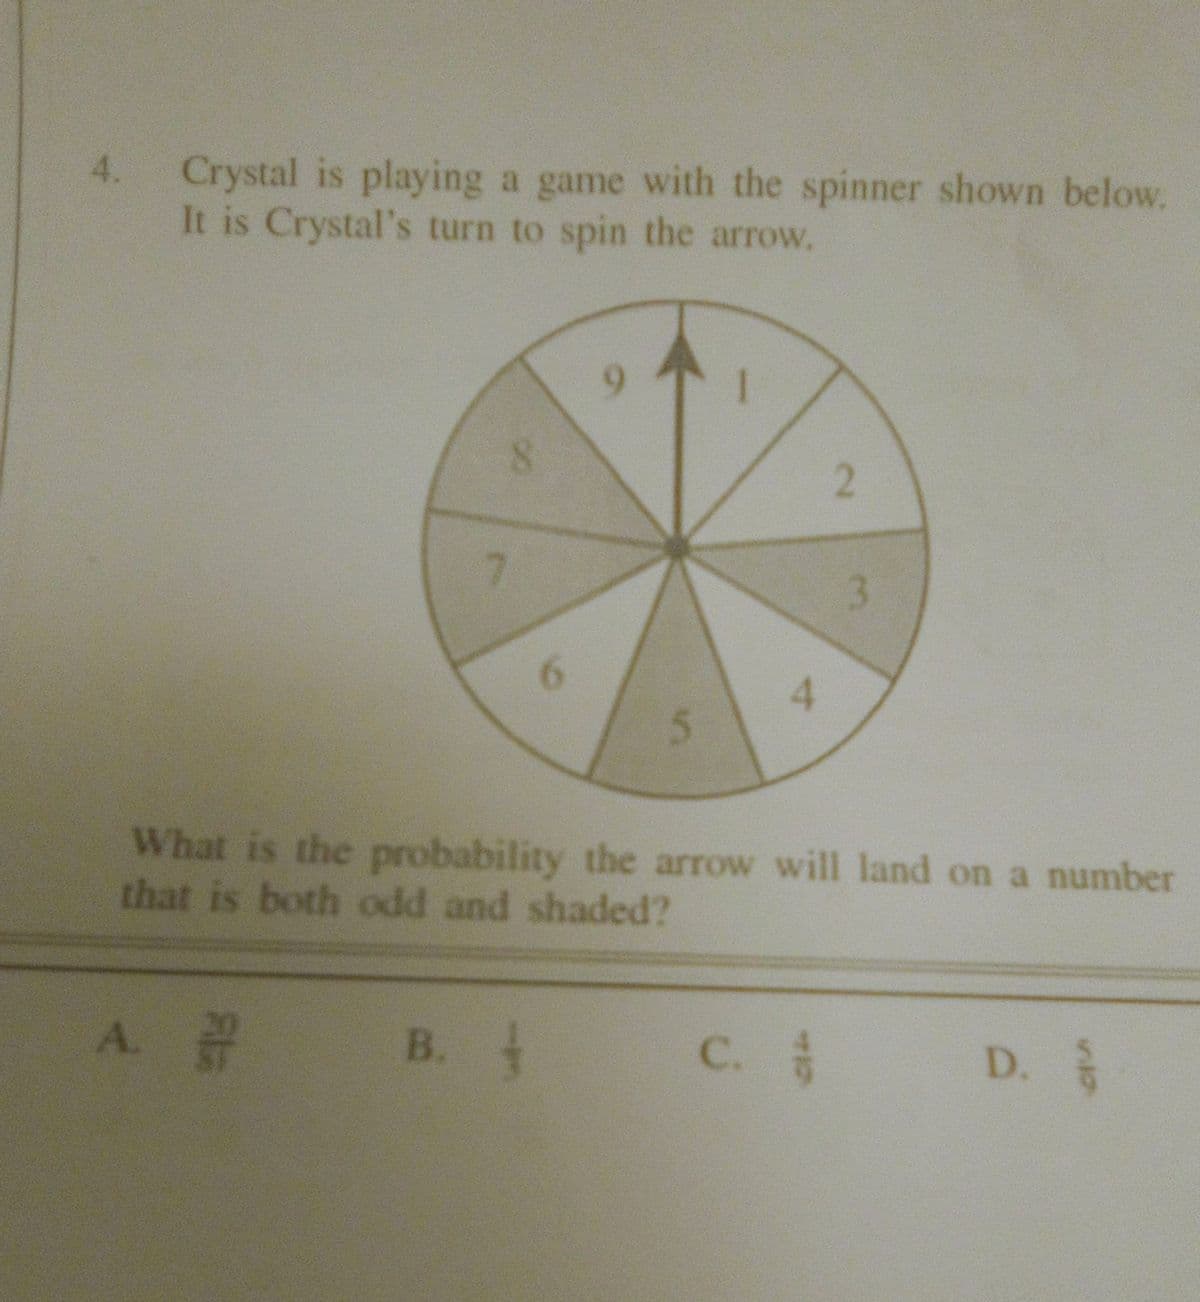 Crystal is playing a game with the spinner shown below.
It is Crystal's turn to spin the arrow.
4.
2.
3
6.
4.
5.
What is the probability the arrow will land on a number
that is both odd and shaded?
A.
В. +
C. #
D.
